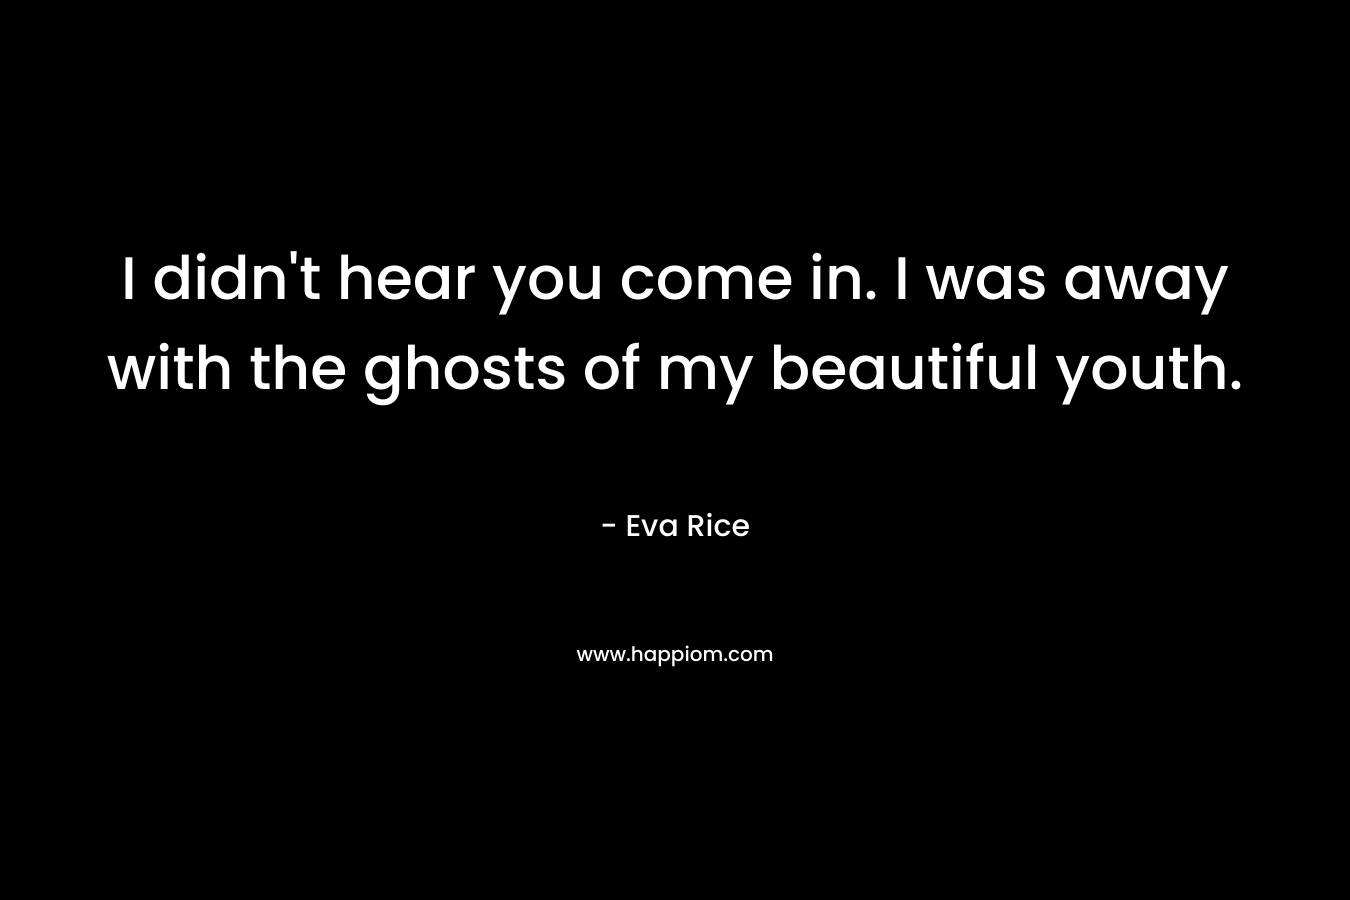 I didn’t hear you come in. I was away with the ghosts of my beautiful youth. – Eva Rice